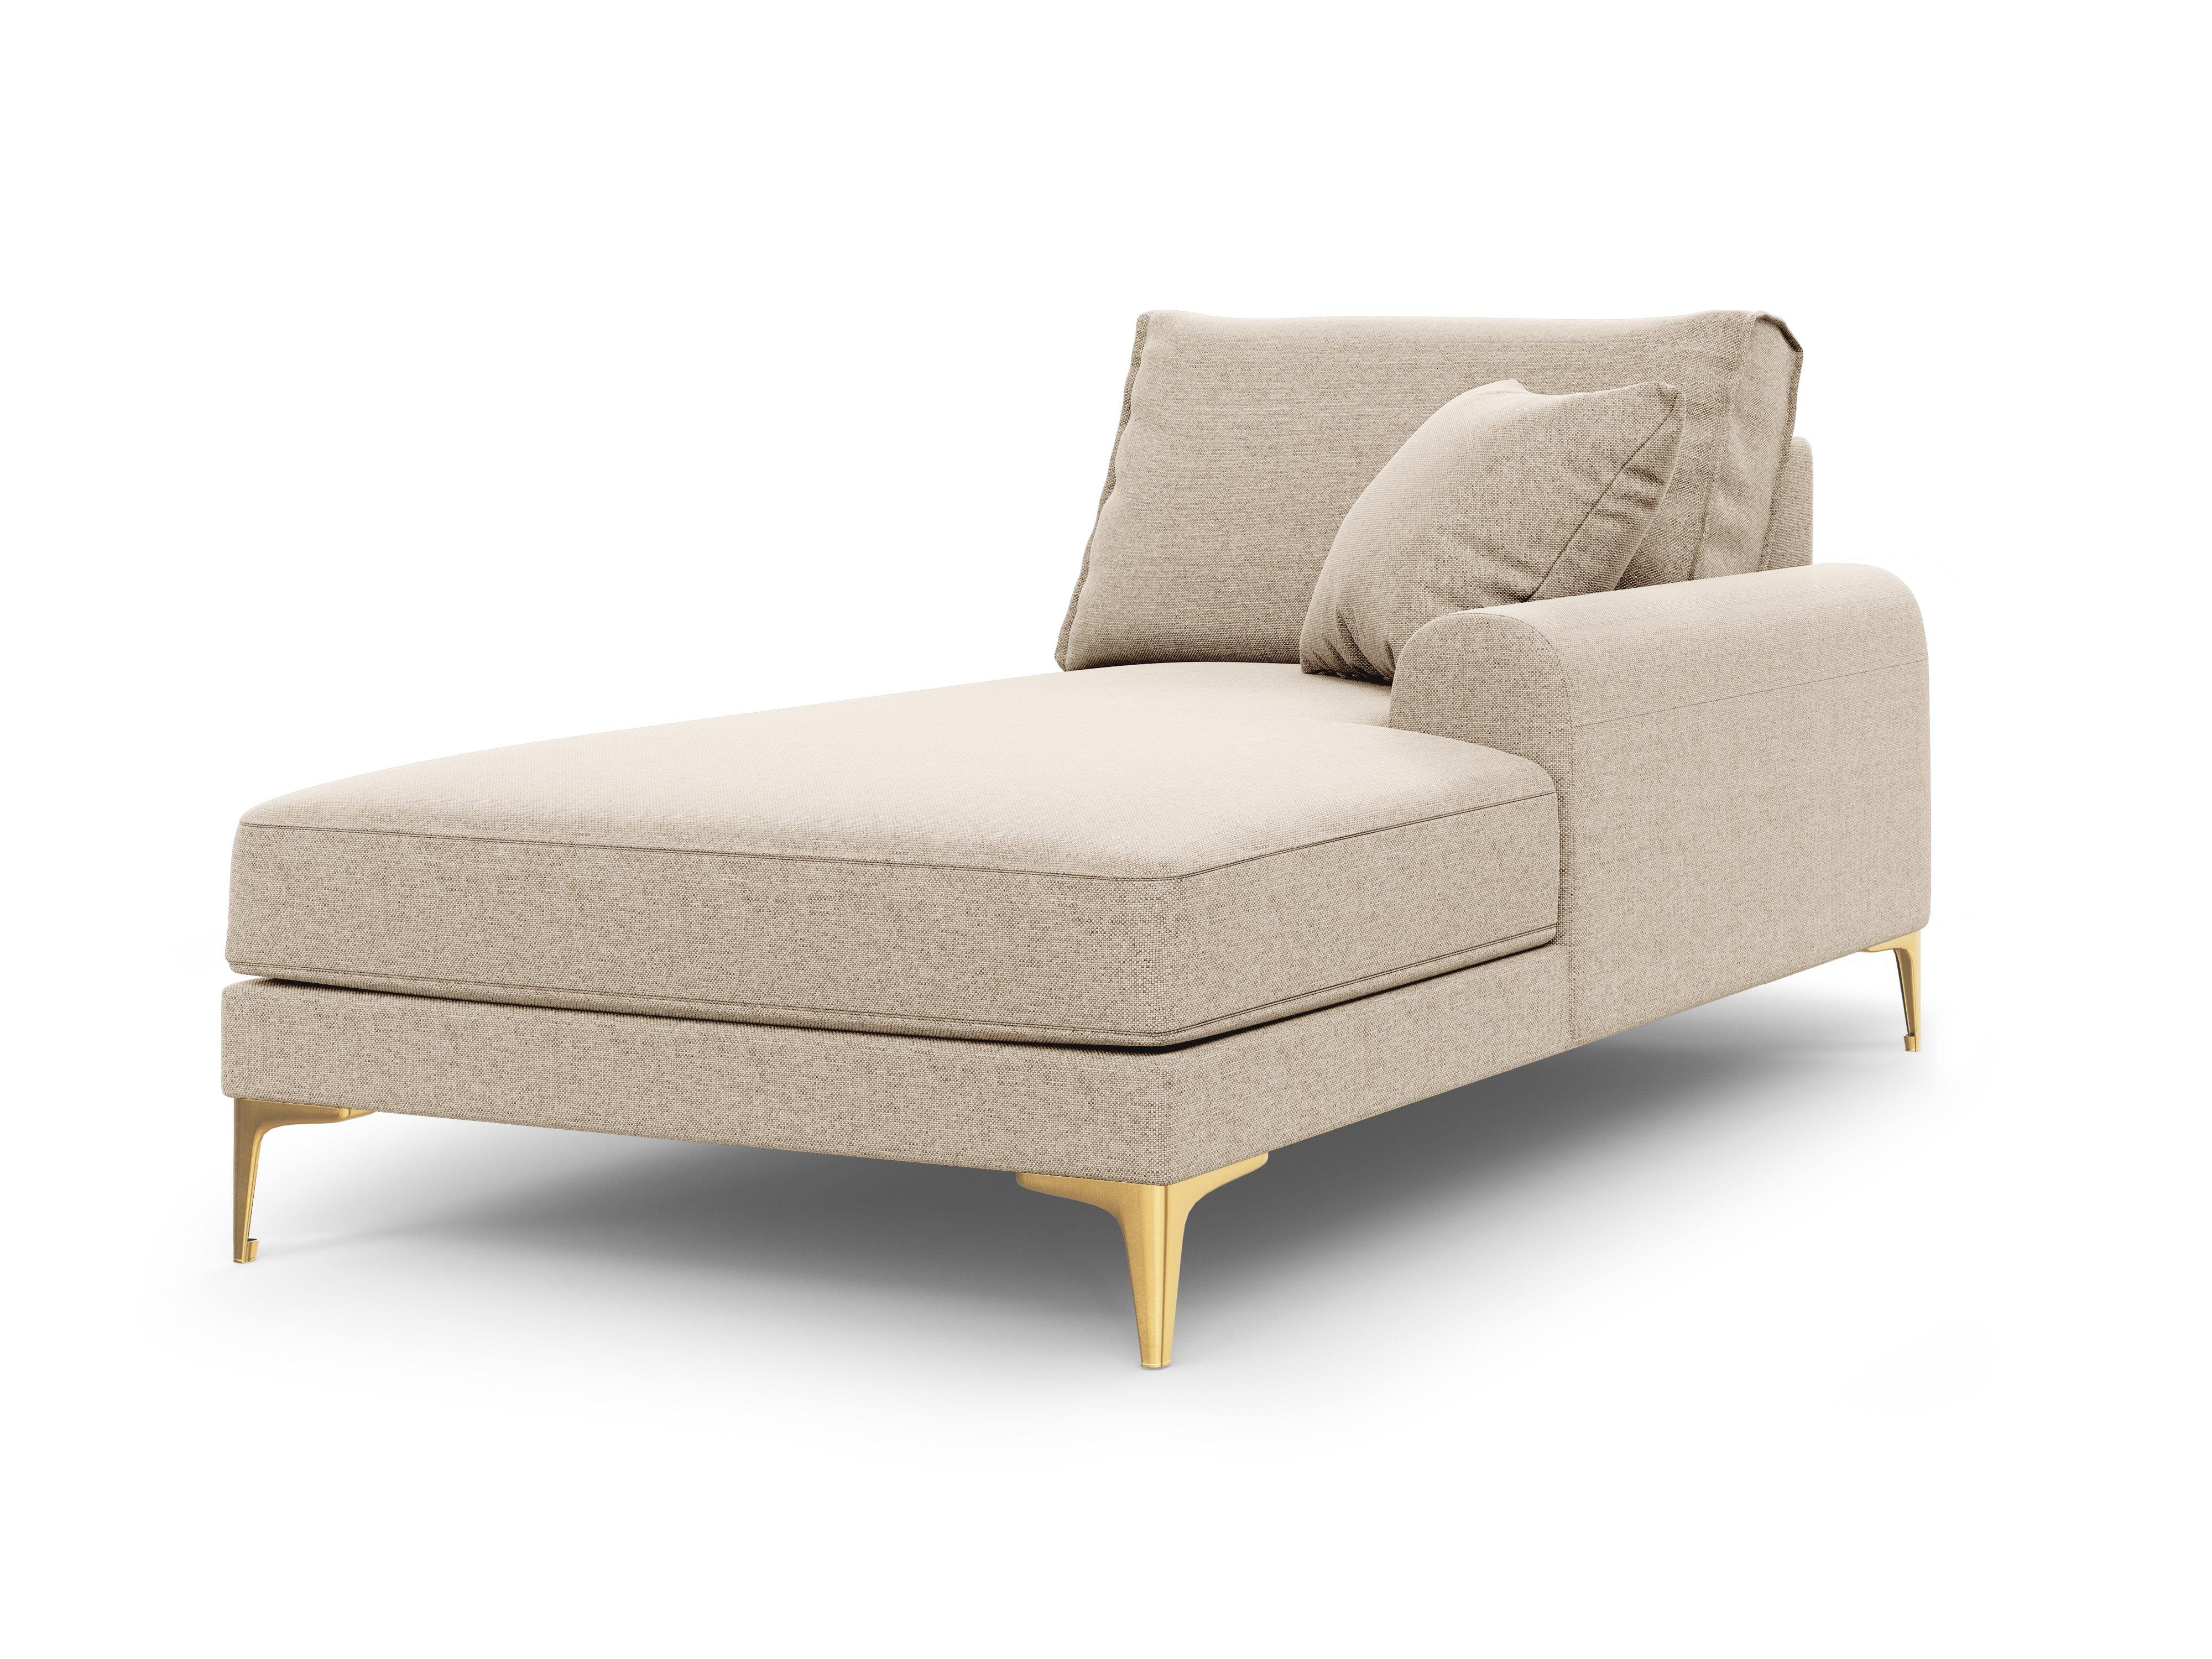 Chaise Longue Right, "Larnite", 1 Seat, 102x182x90
Made in Europe, Micadoni, Eye on Design